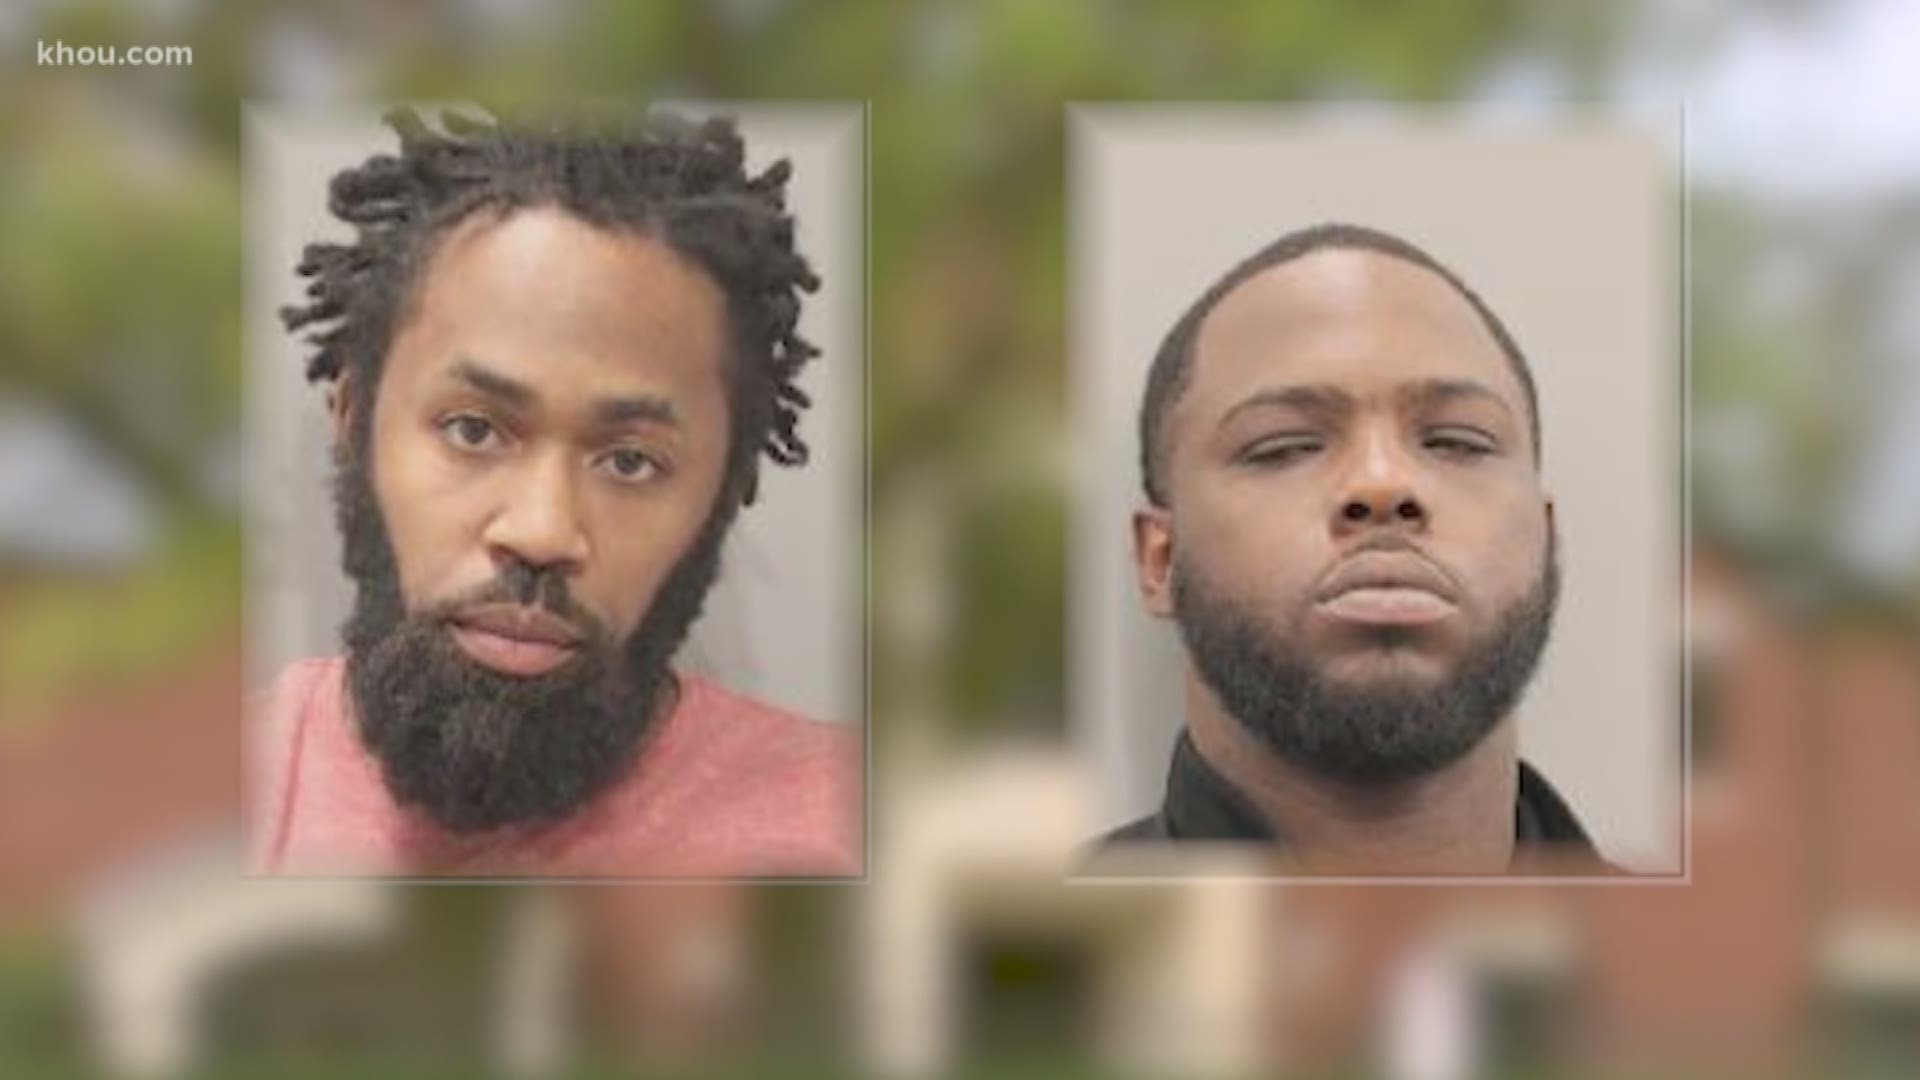 Police said the suspects followed their victims’ social media accounts to determine when homeowners in River Oaks would be at work, travel or even host a large party.